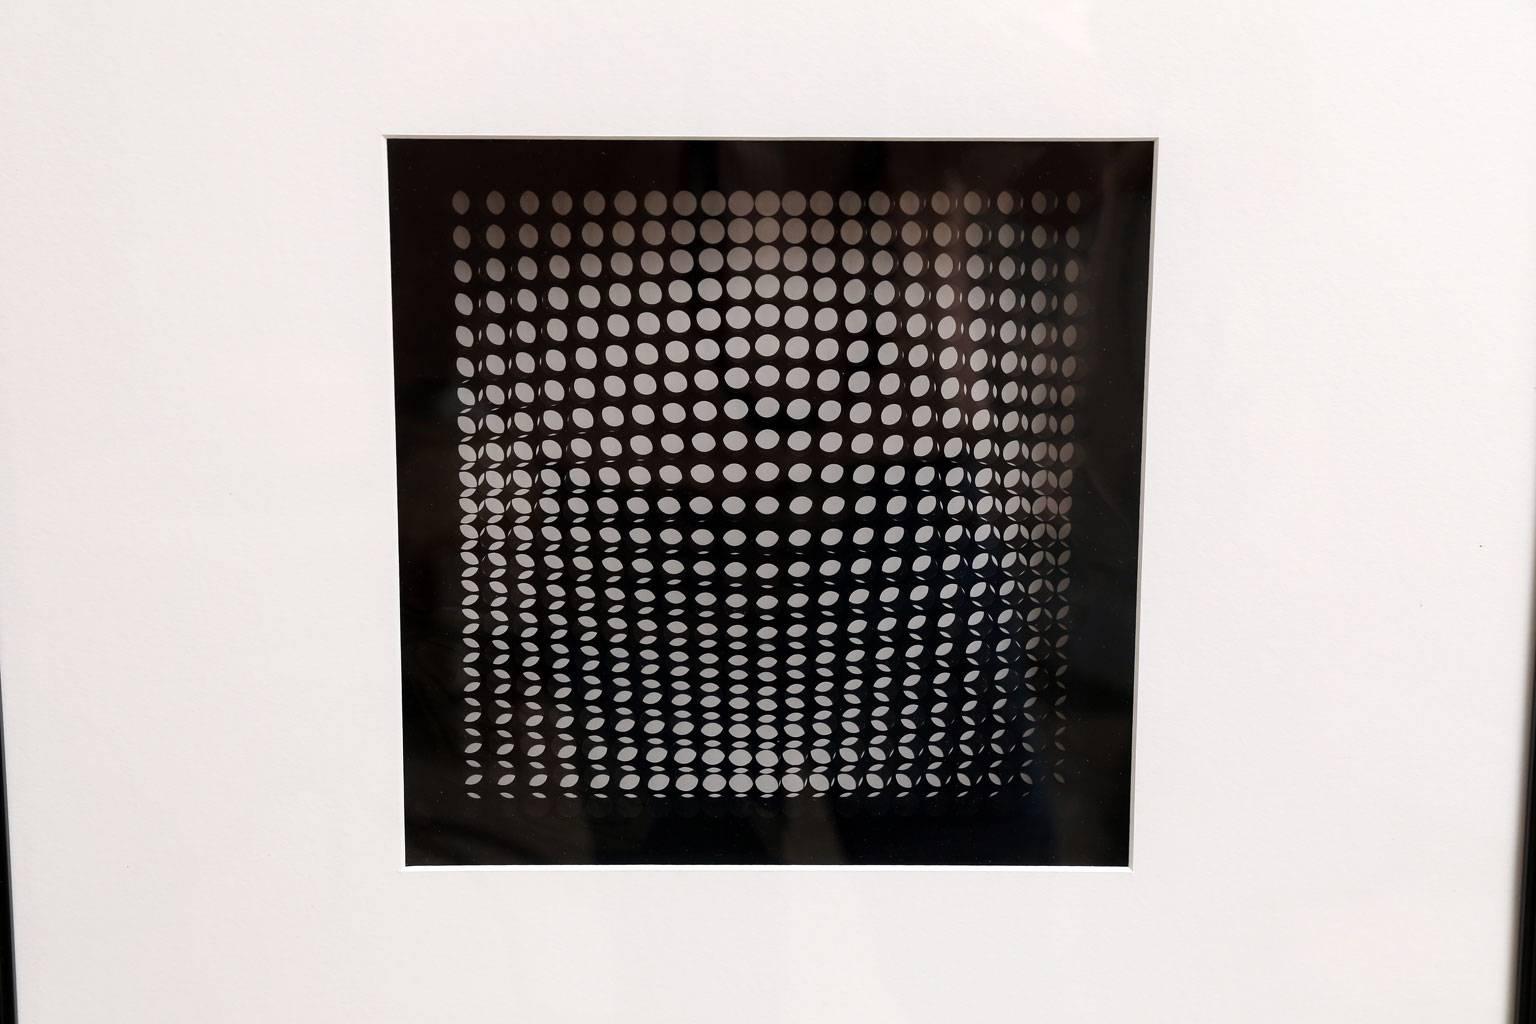 Original Victor Vasarely Oeuvres Profondes, Editions Du Griffon Neuchâtel, 1973. Silk screen on transparency over printed rag paper. Unsigned and framed in a black painted wooden shadowbox. This print would make an excellent set of two with item